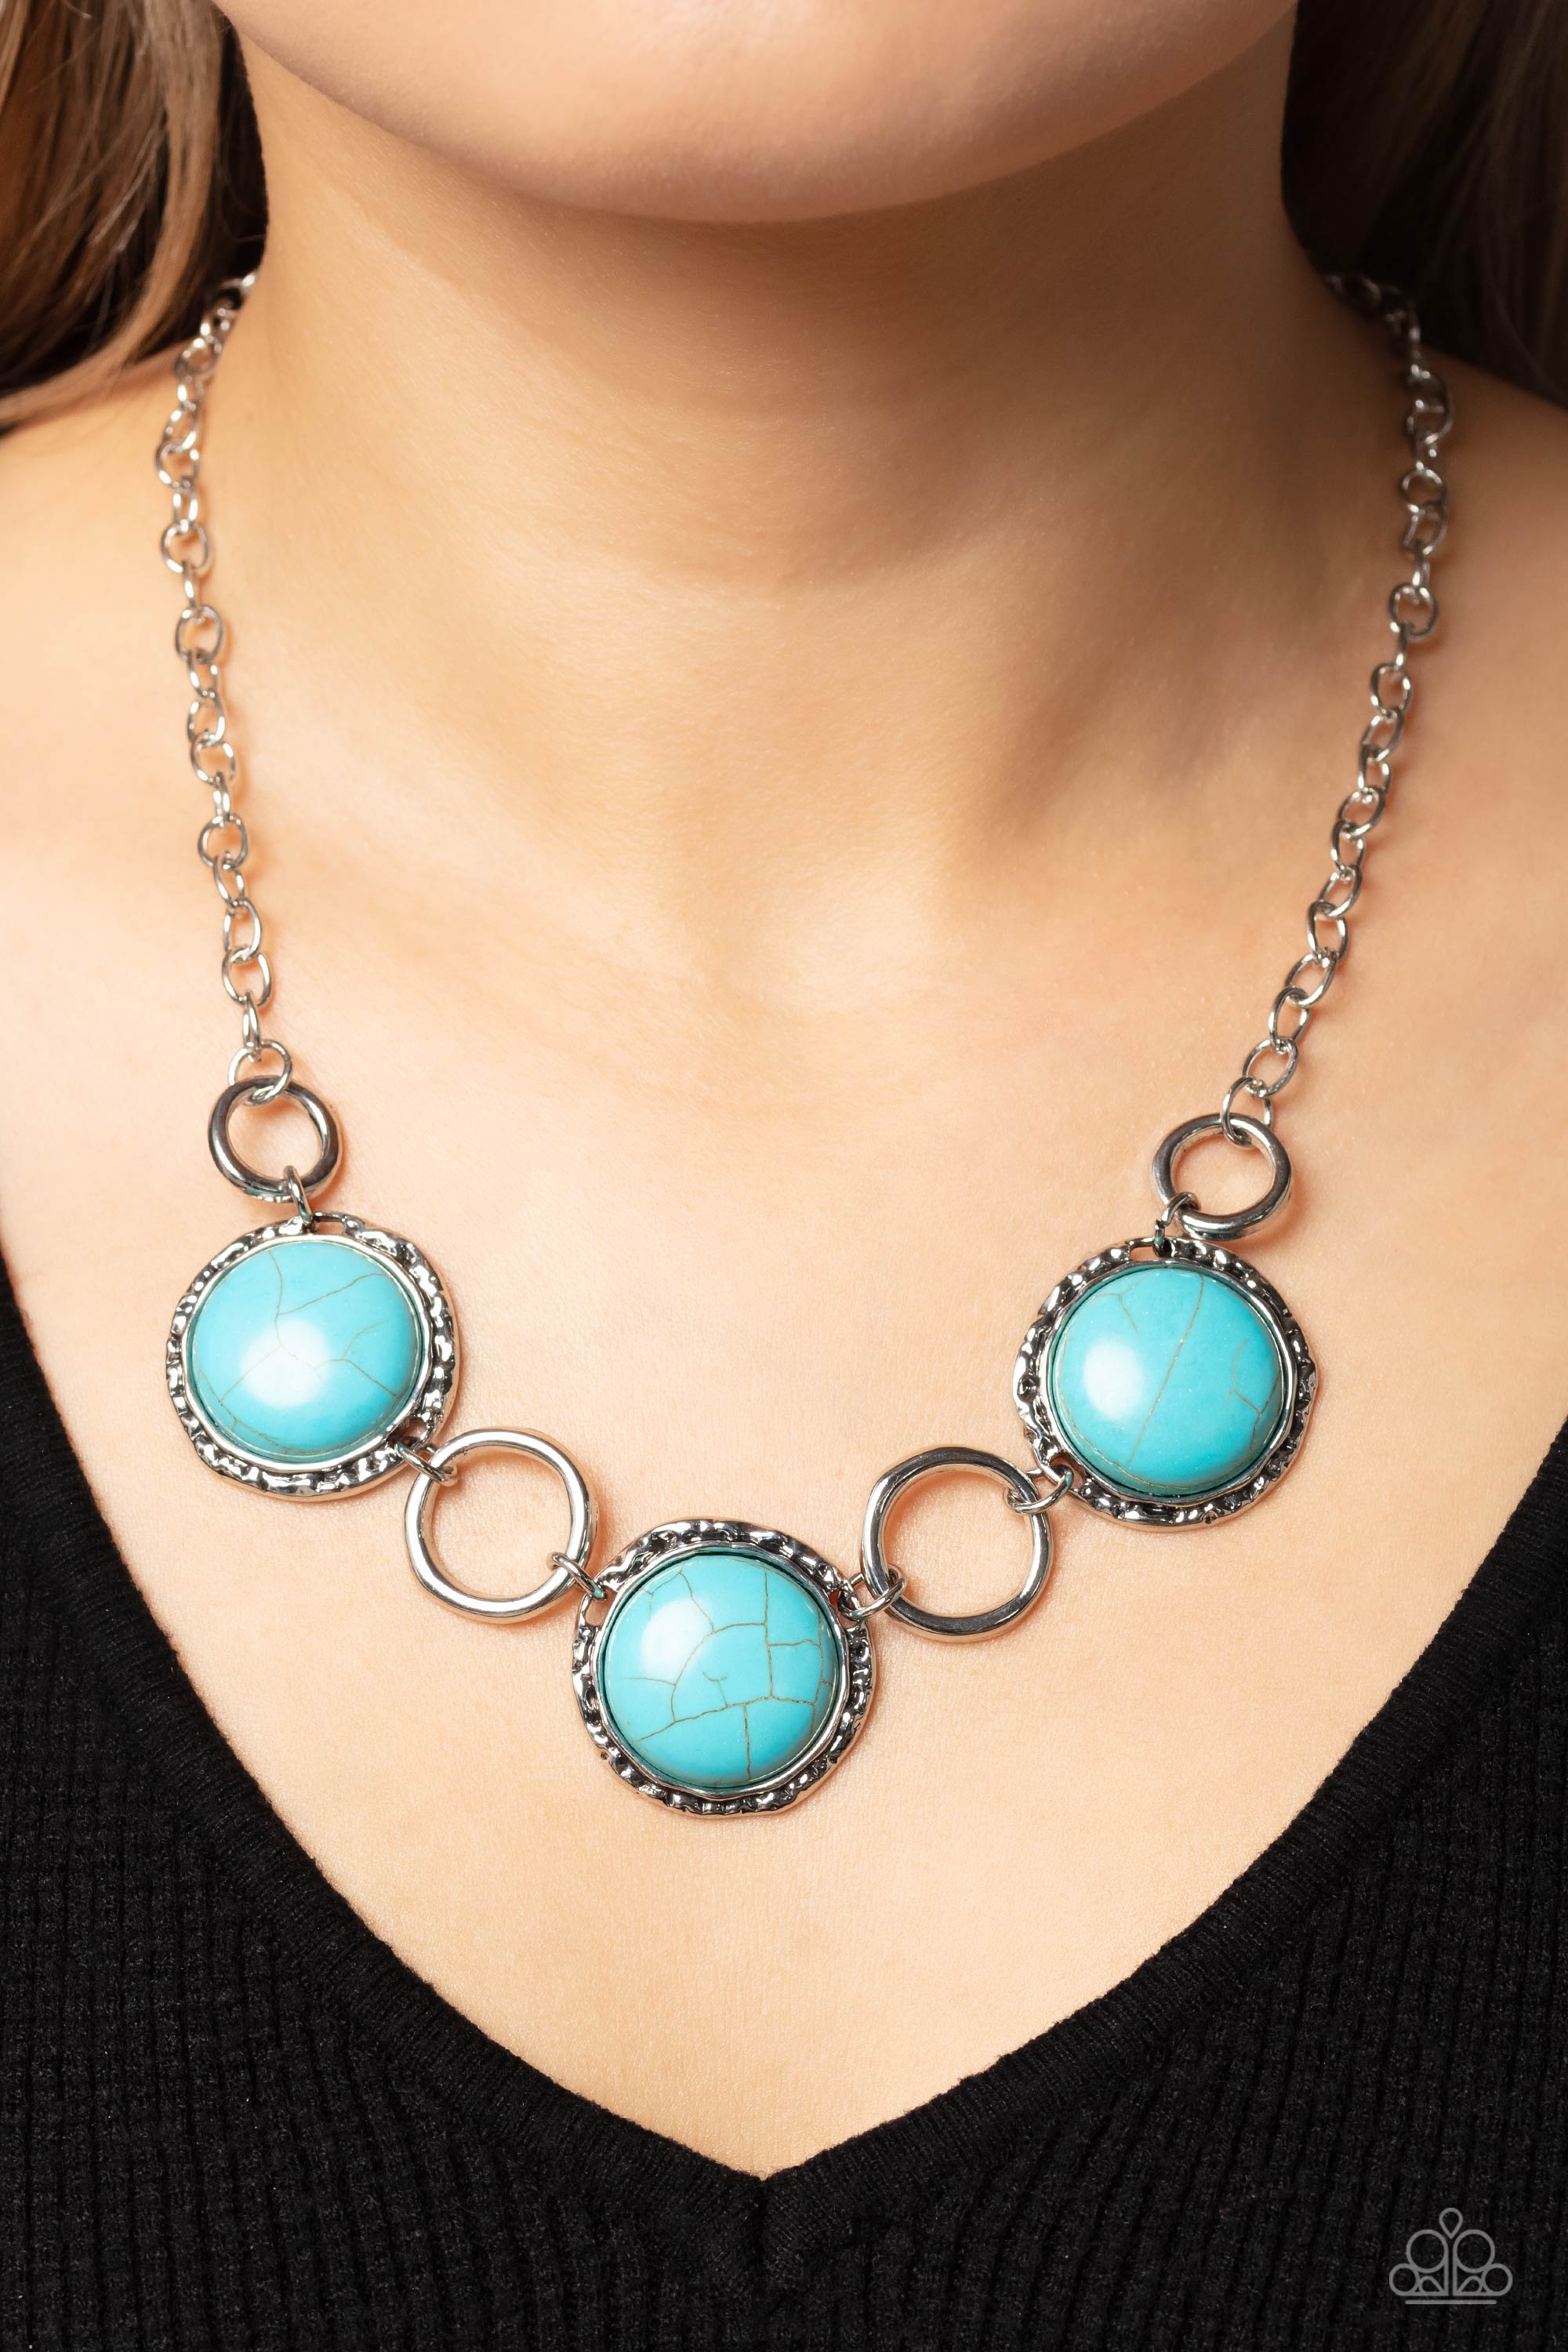 Paparazzi Day Trip Delights - Necklace Blue Box 6 – Cynthia's Dazzling $5  Bling